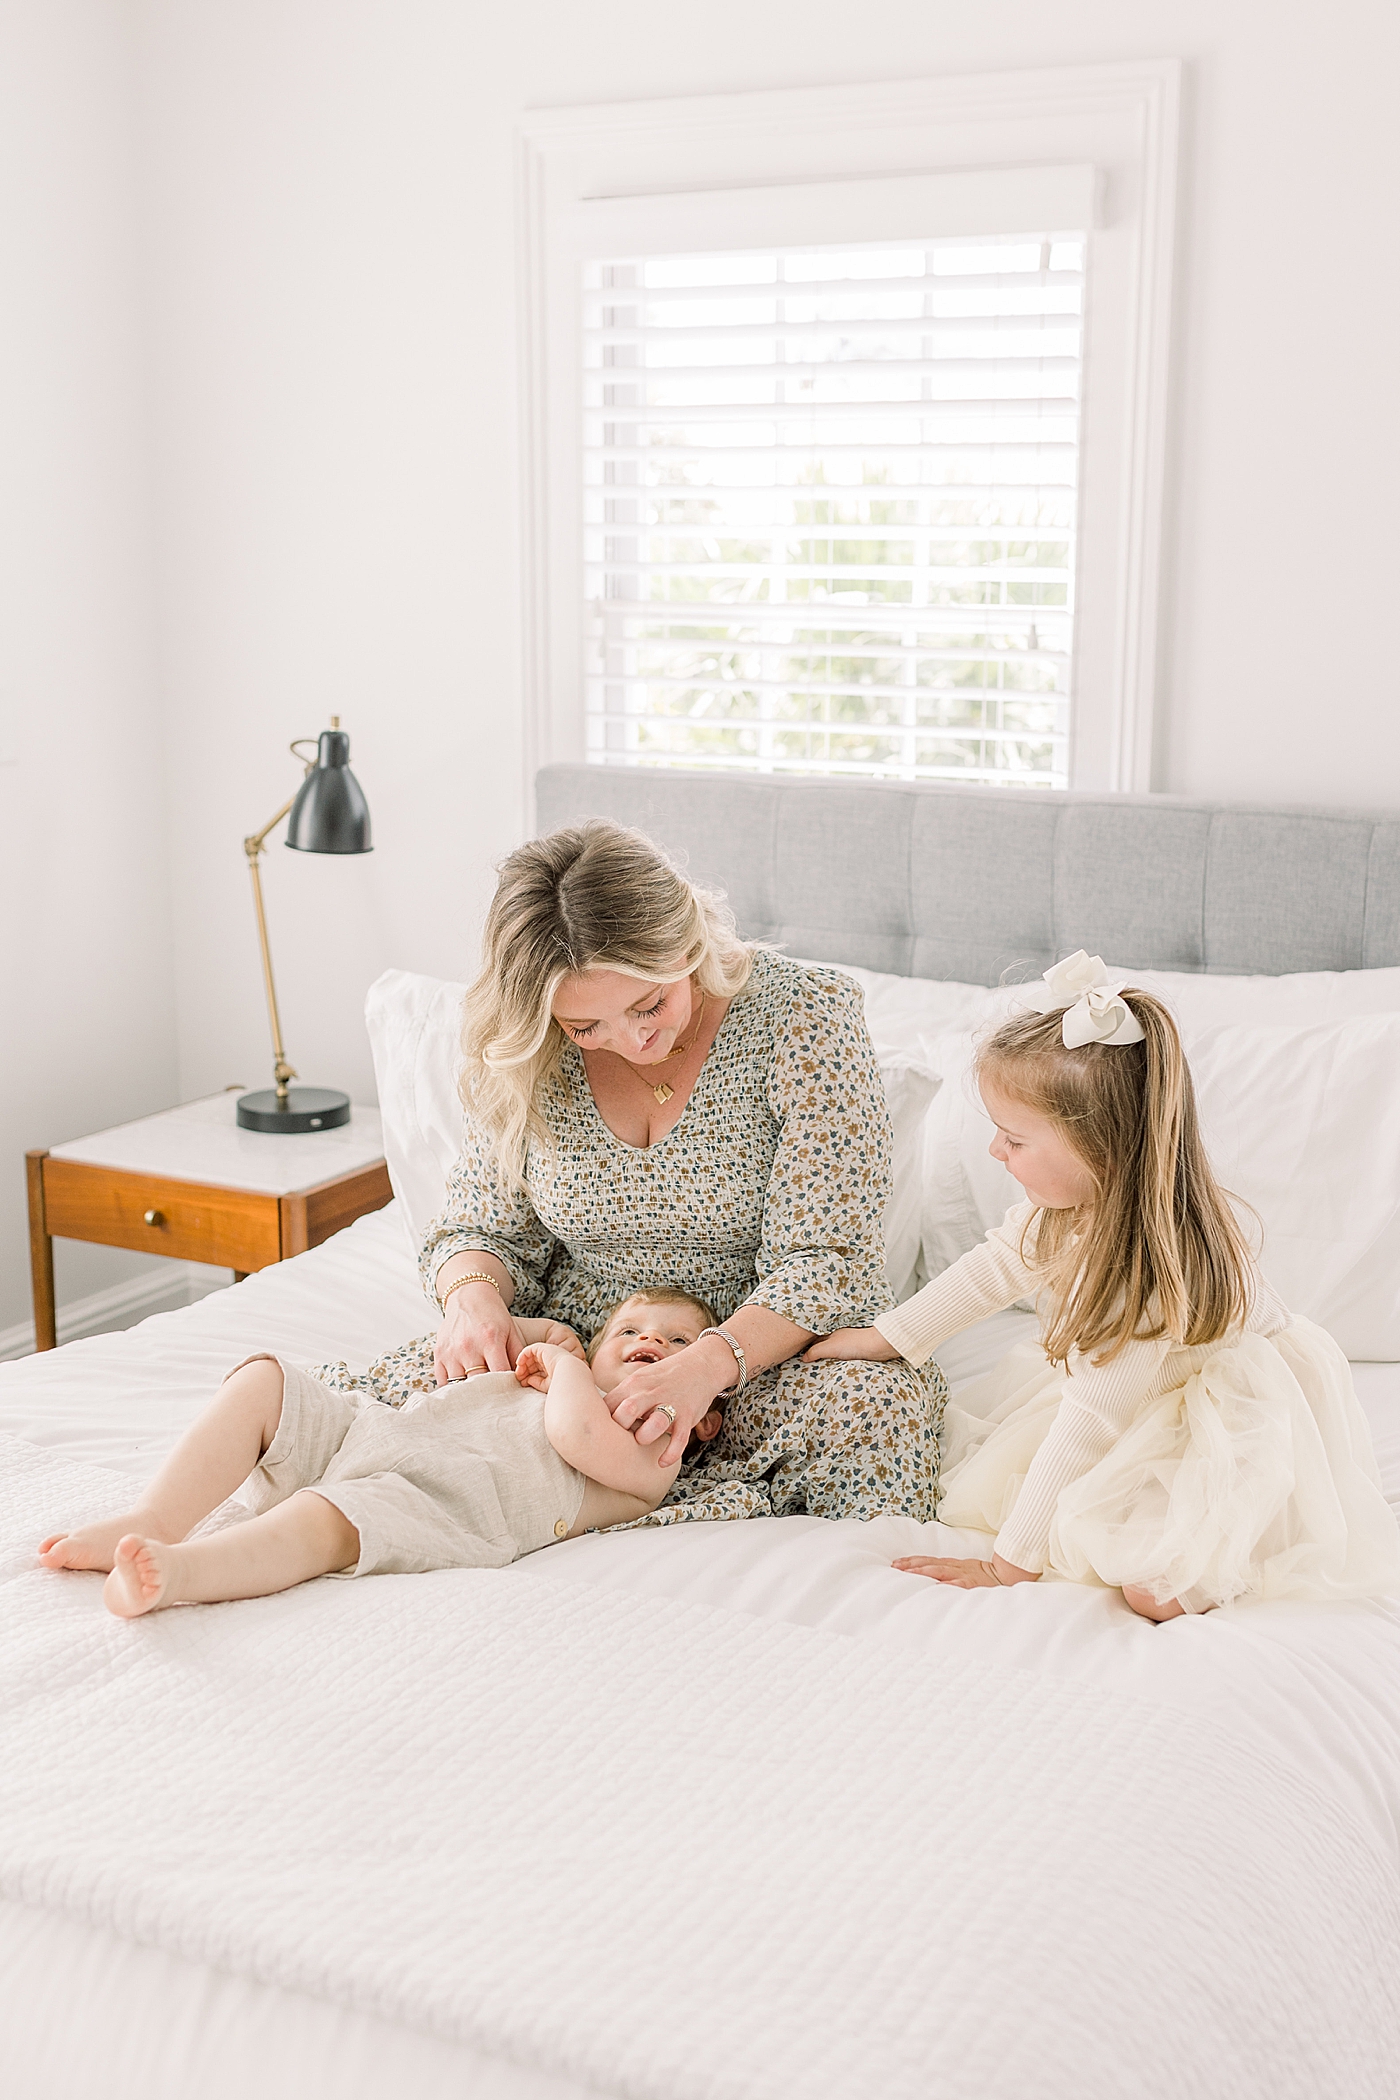 Mother in a sunny bedroom on the bed smiling, playing with her two children | Image by Caitlyn Motycka 